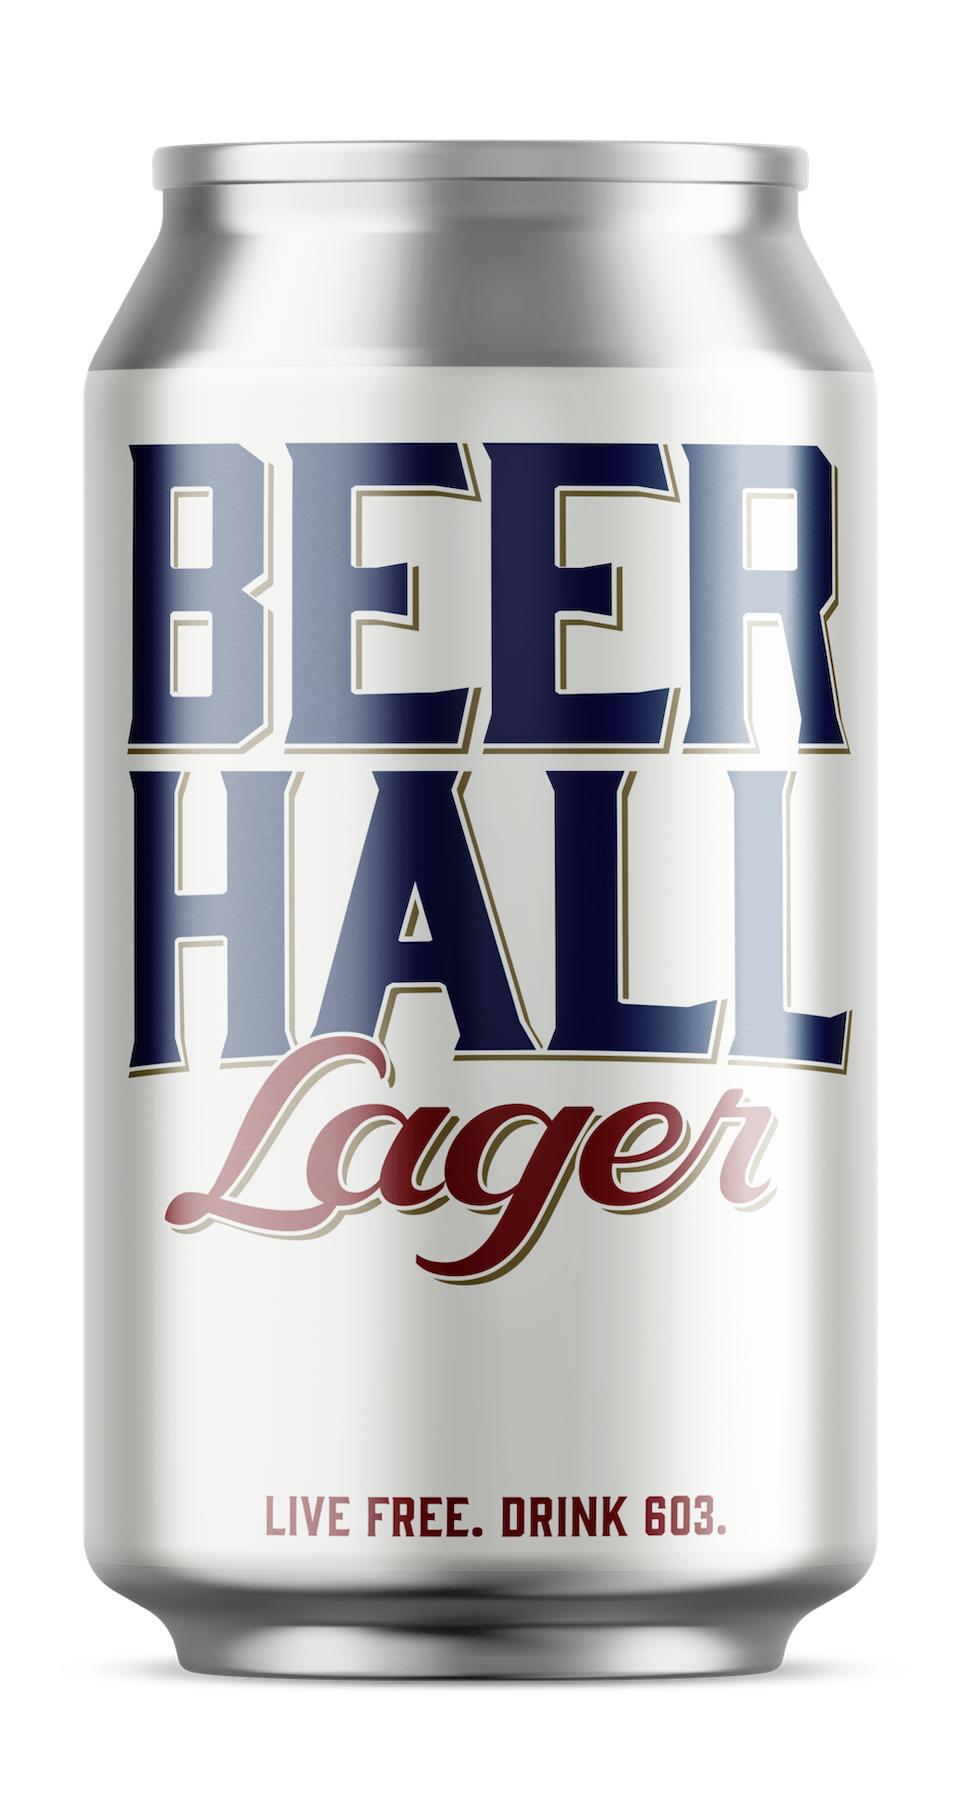 BeerHallLager_Mock- can image